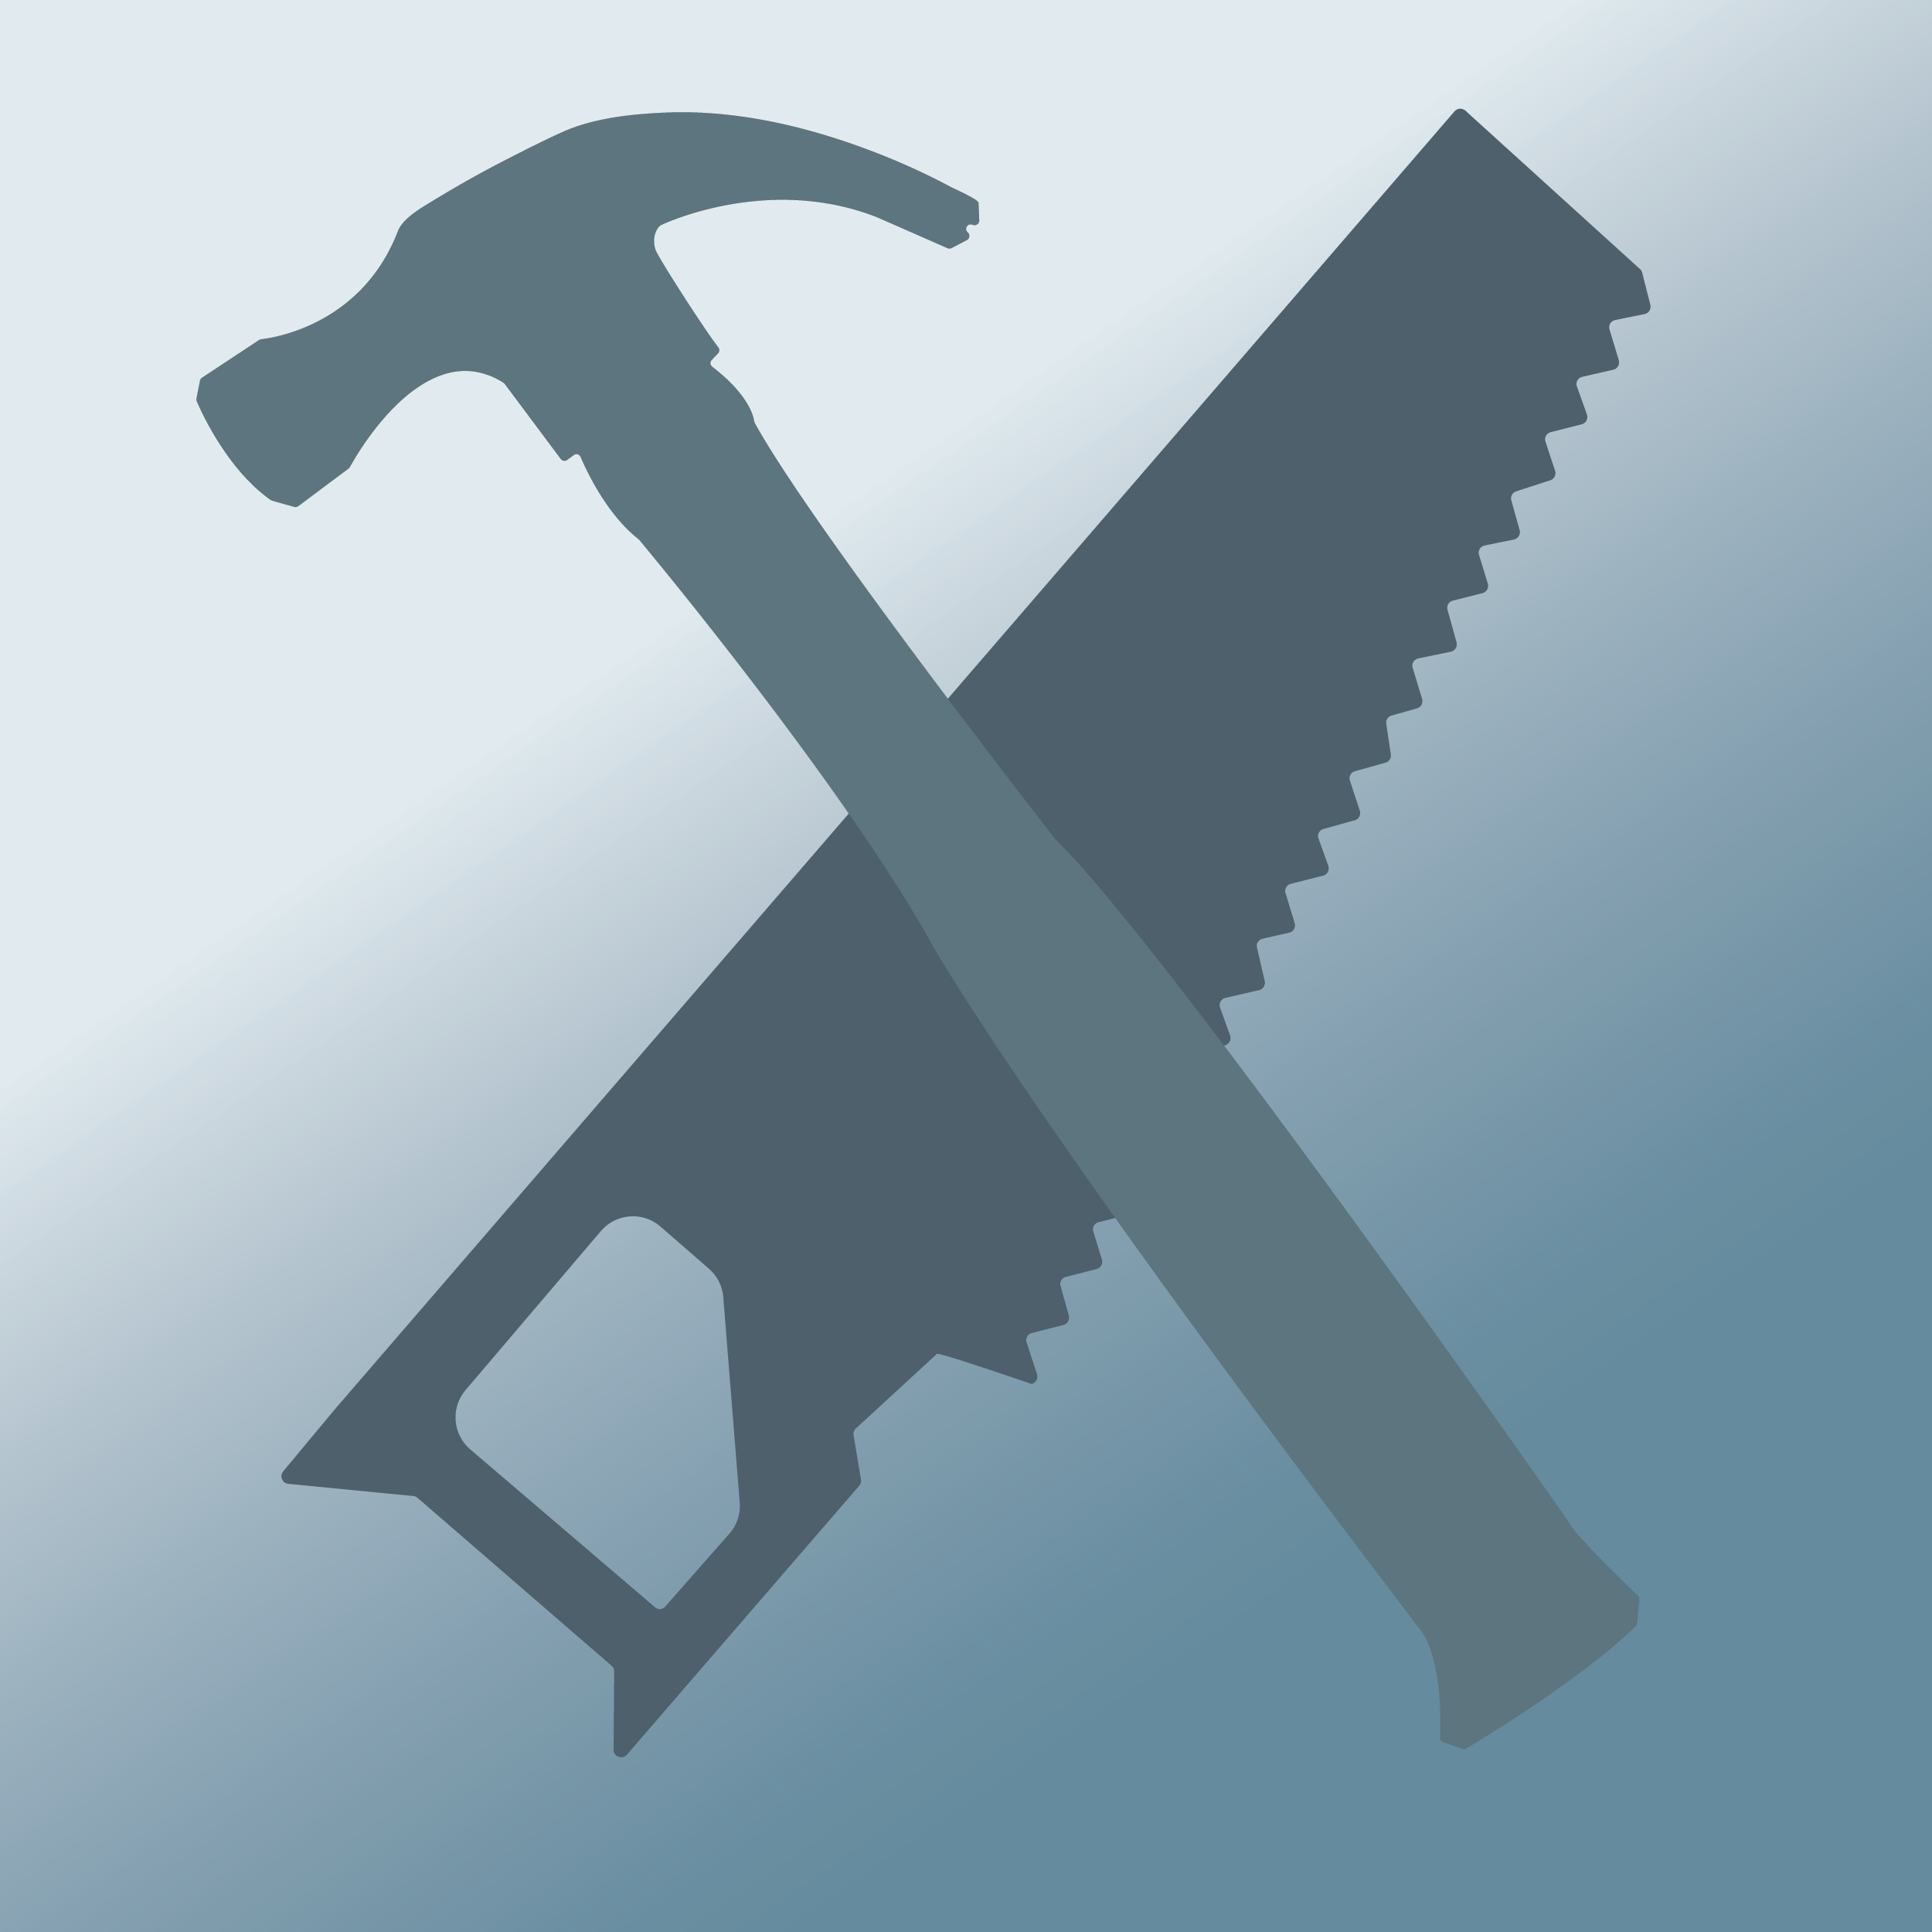 Silhouette of Hammer and Saw